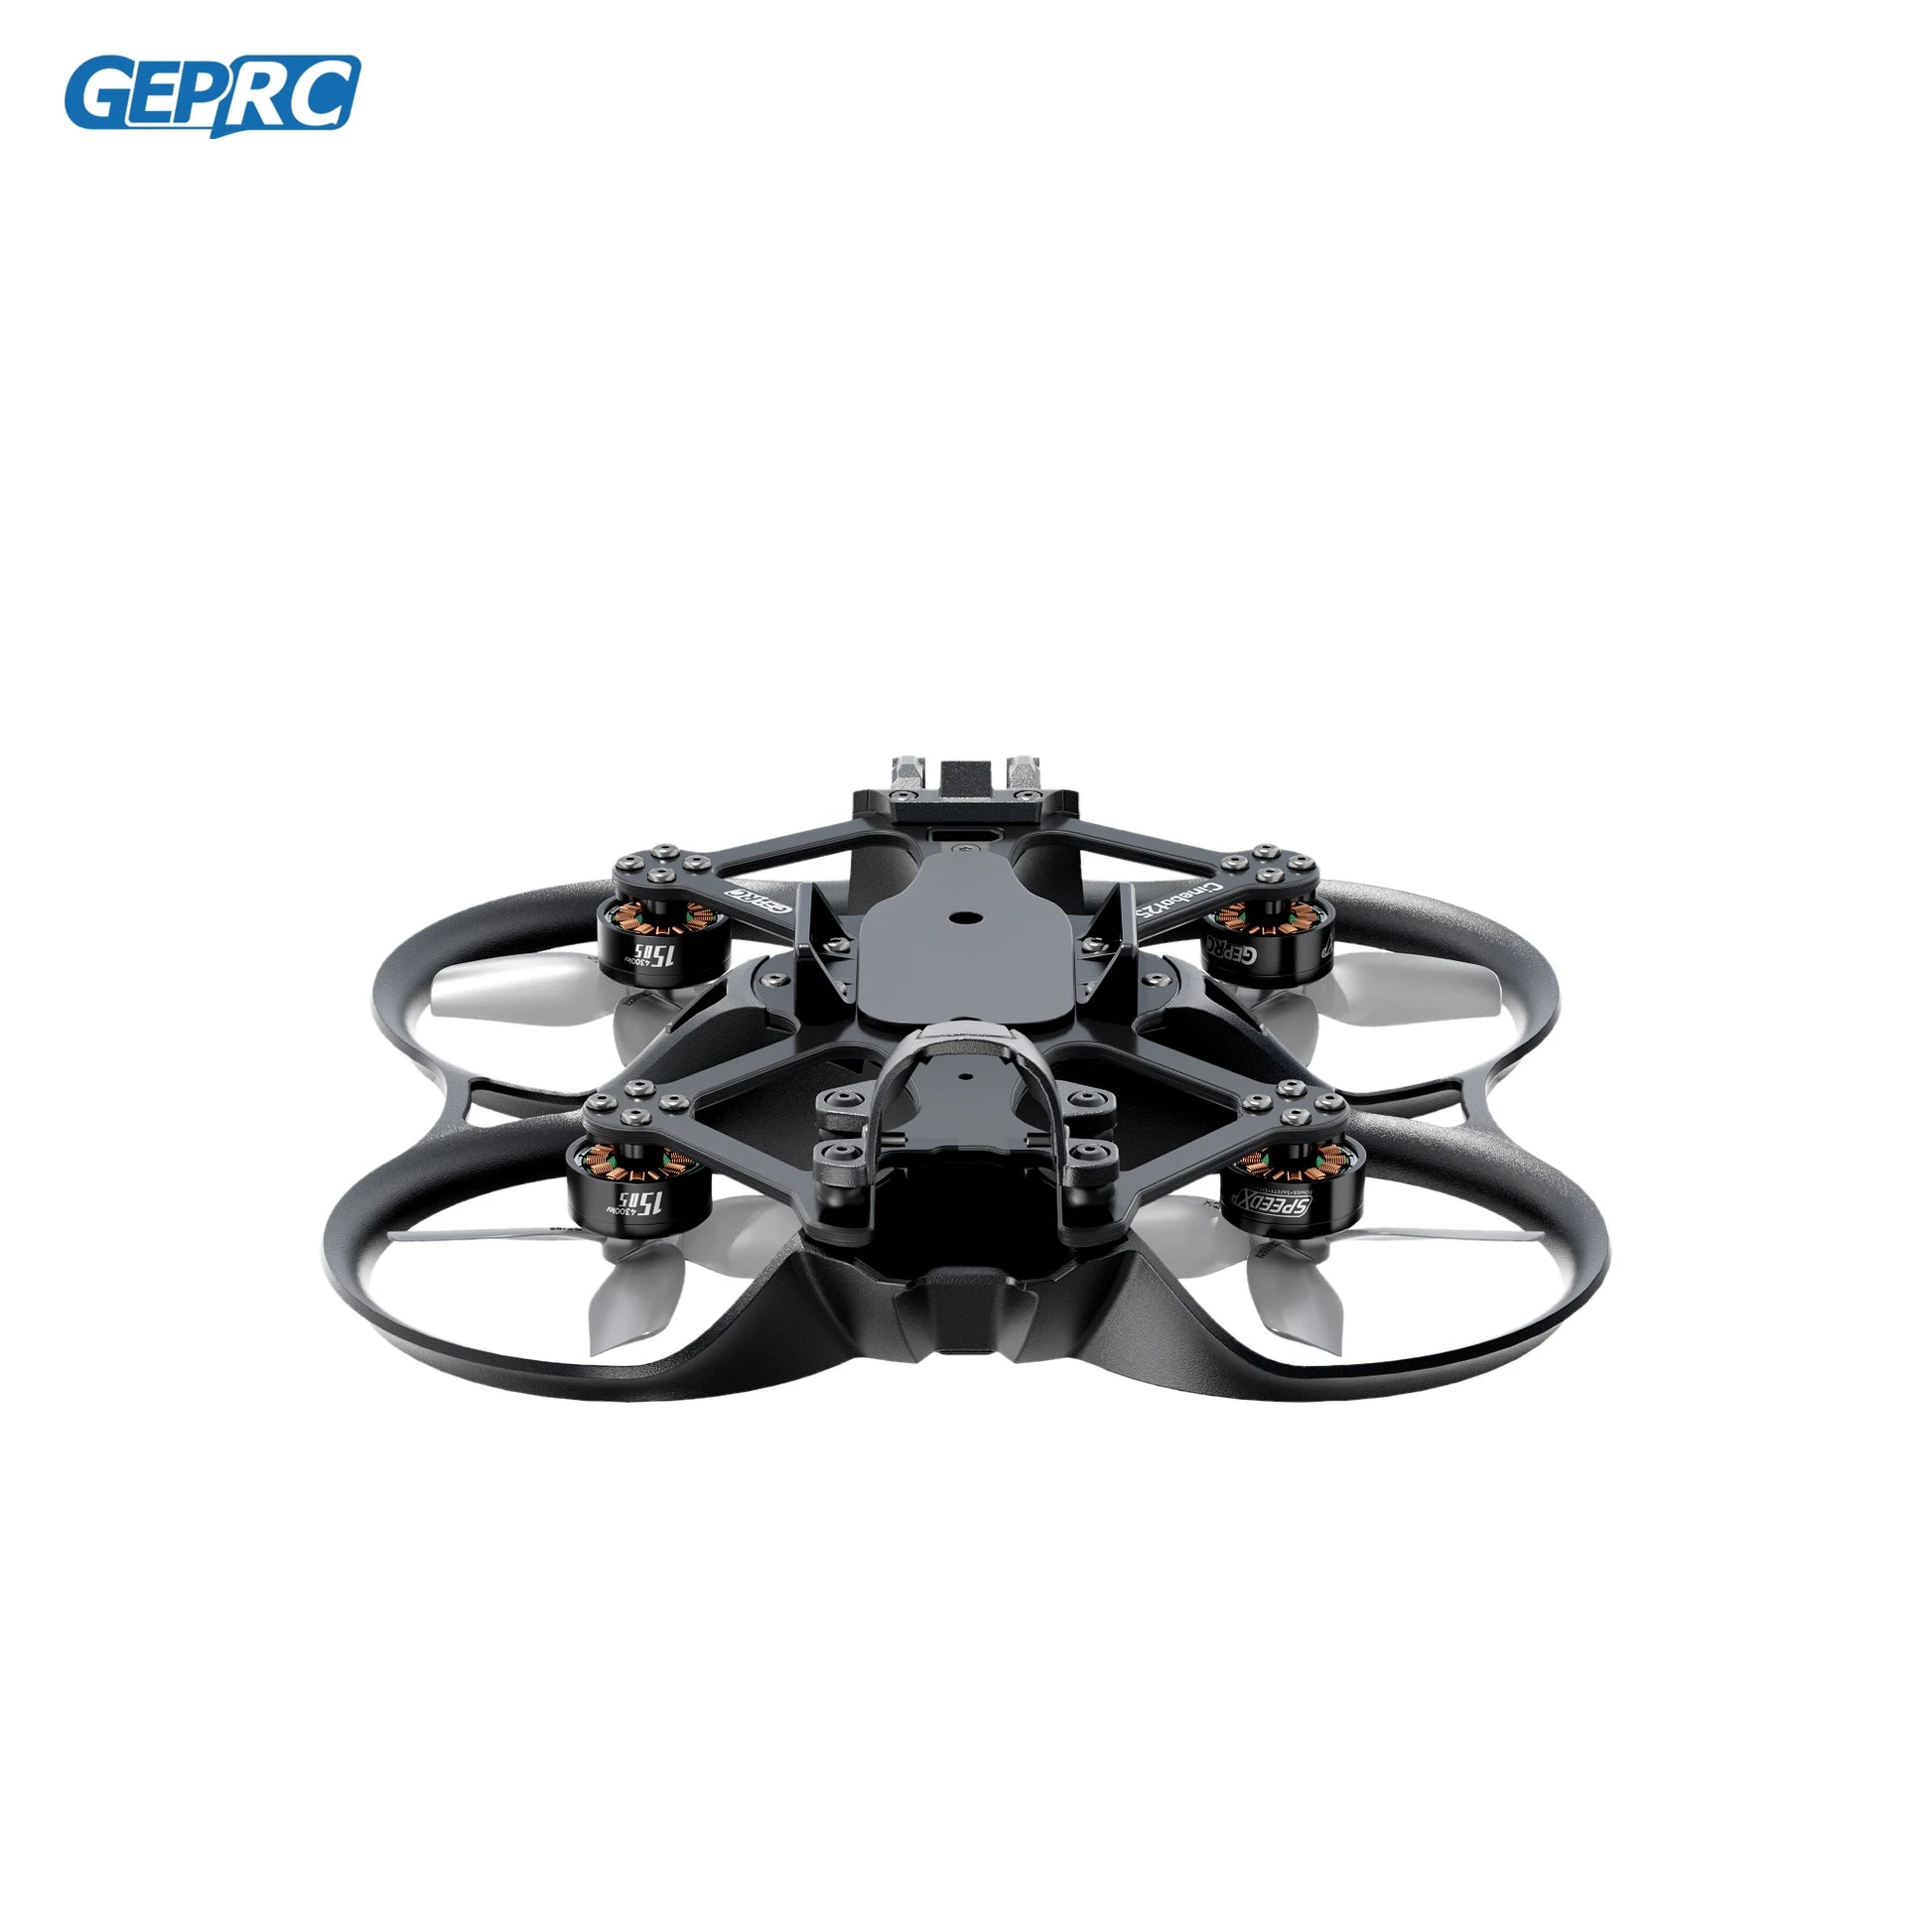 GEPRC Cinebot25 S WTFPV 2.5inch FPV Drone 